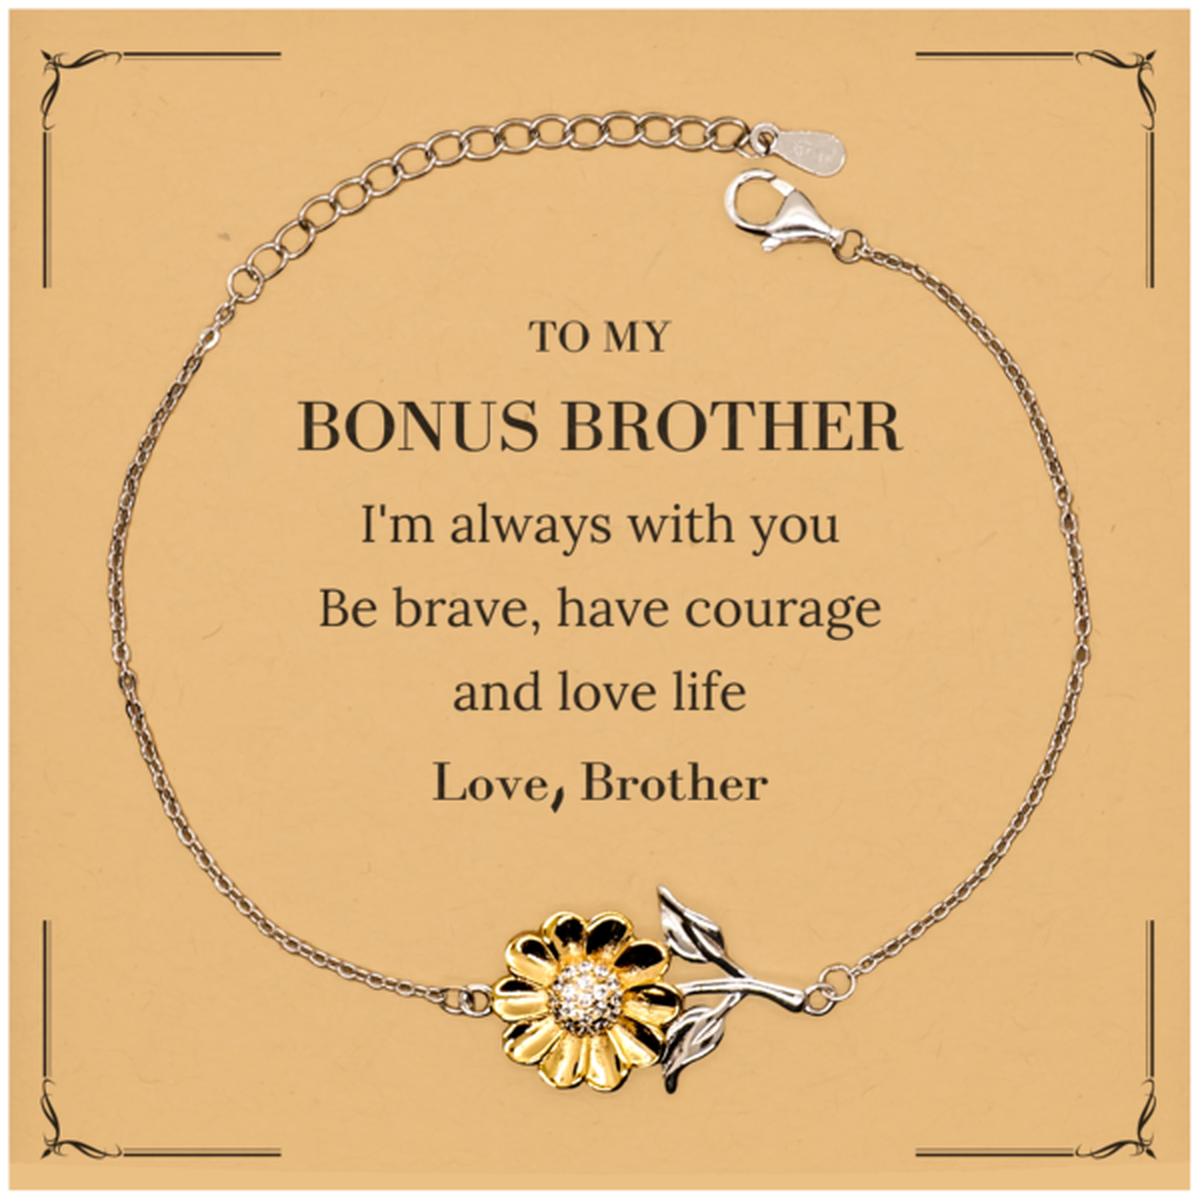 To My Bonus Brother Gifts from Brother, Unique Sunflower Bracelet Inspirational Christmas Birthday Graduation Gifts for Bonus Brother I'm always with you. Be brave, have courage and love life. Love, Brother